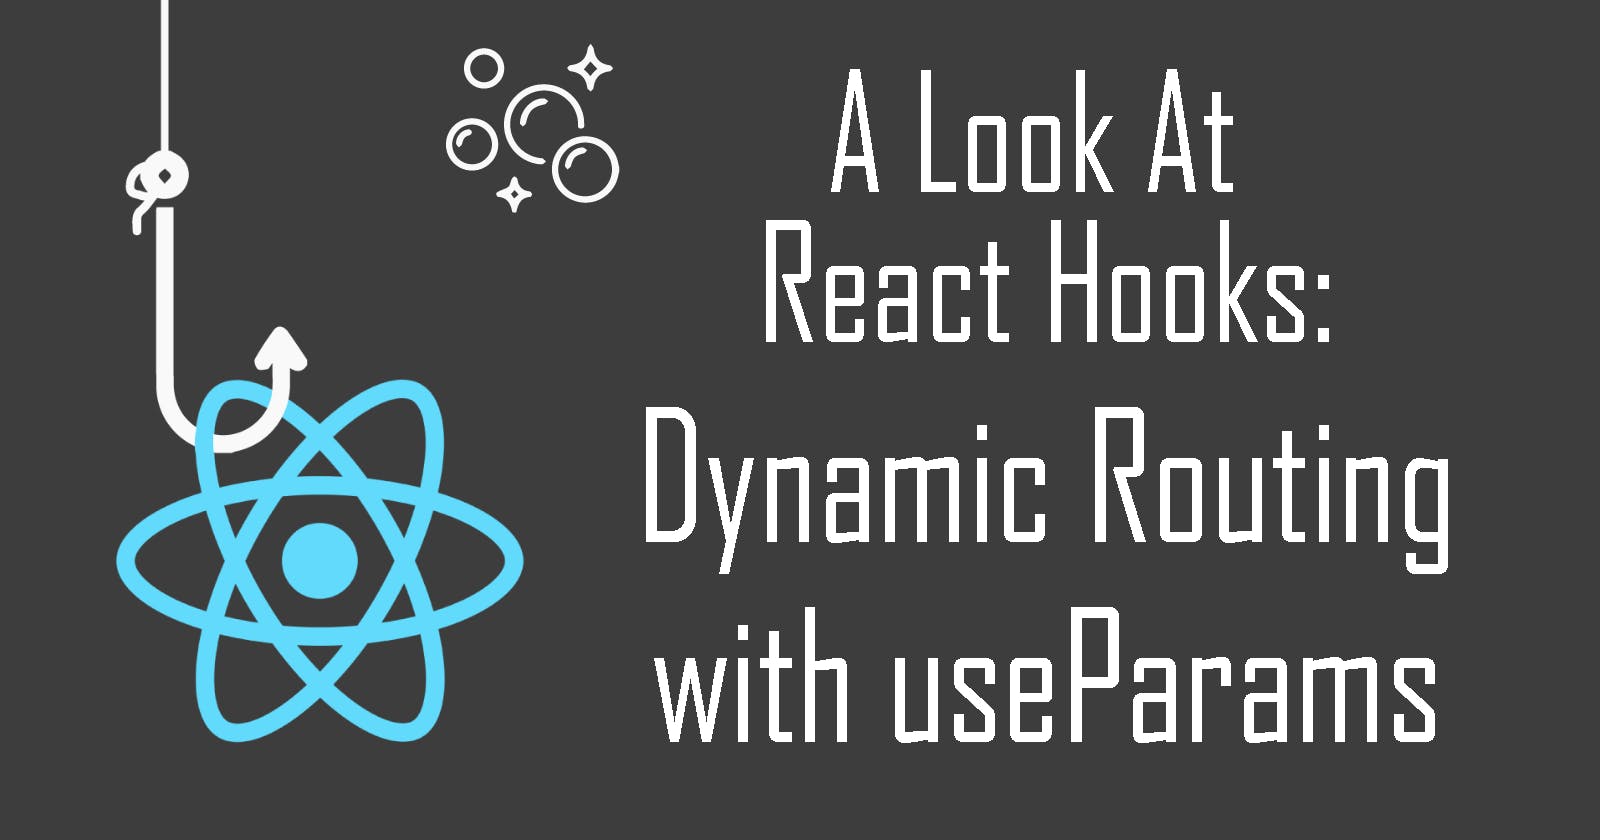 A Look at React Hooks: useParams for Dynamic Routing